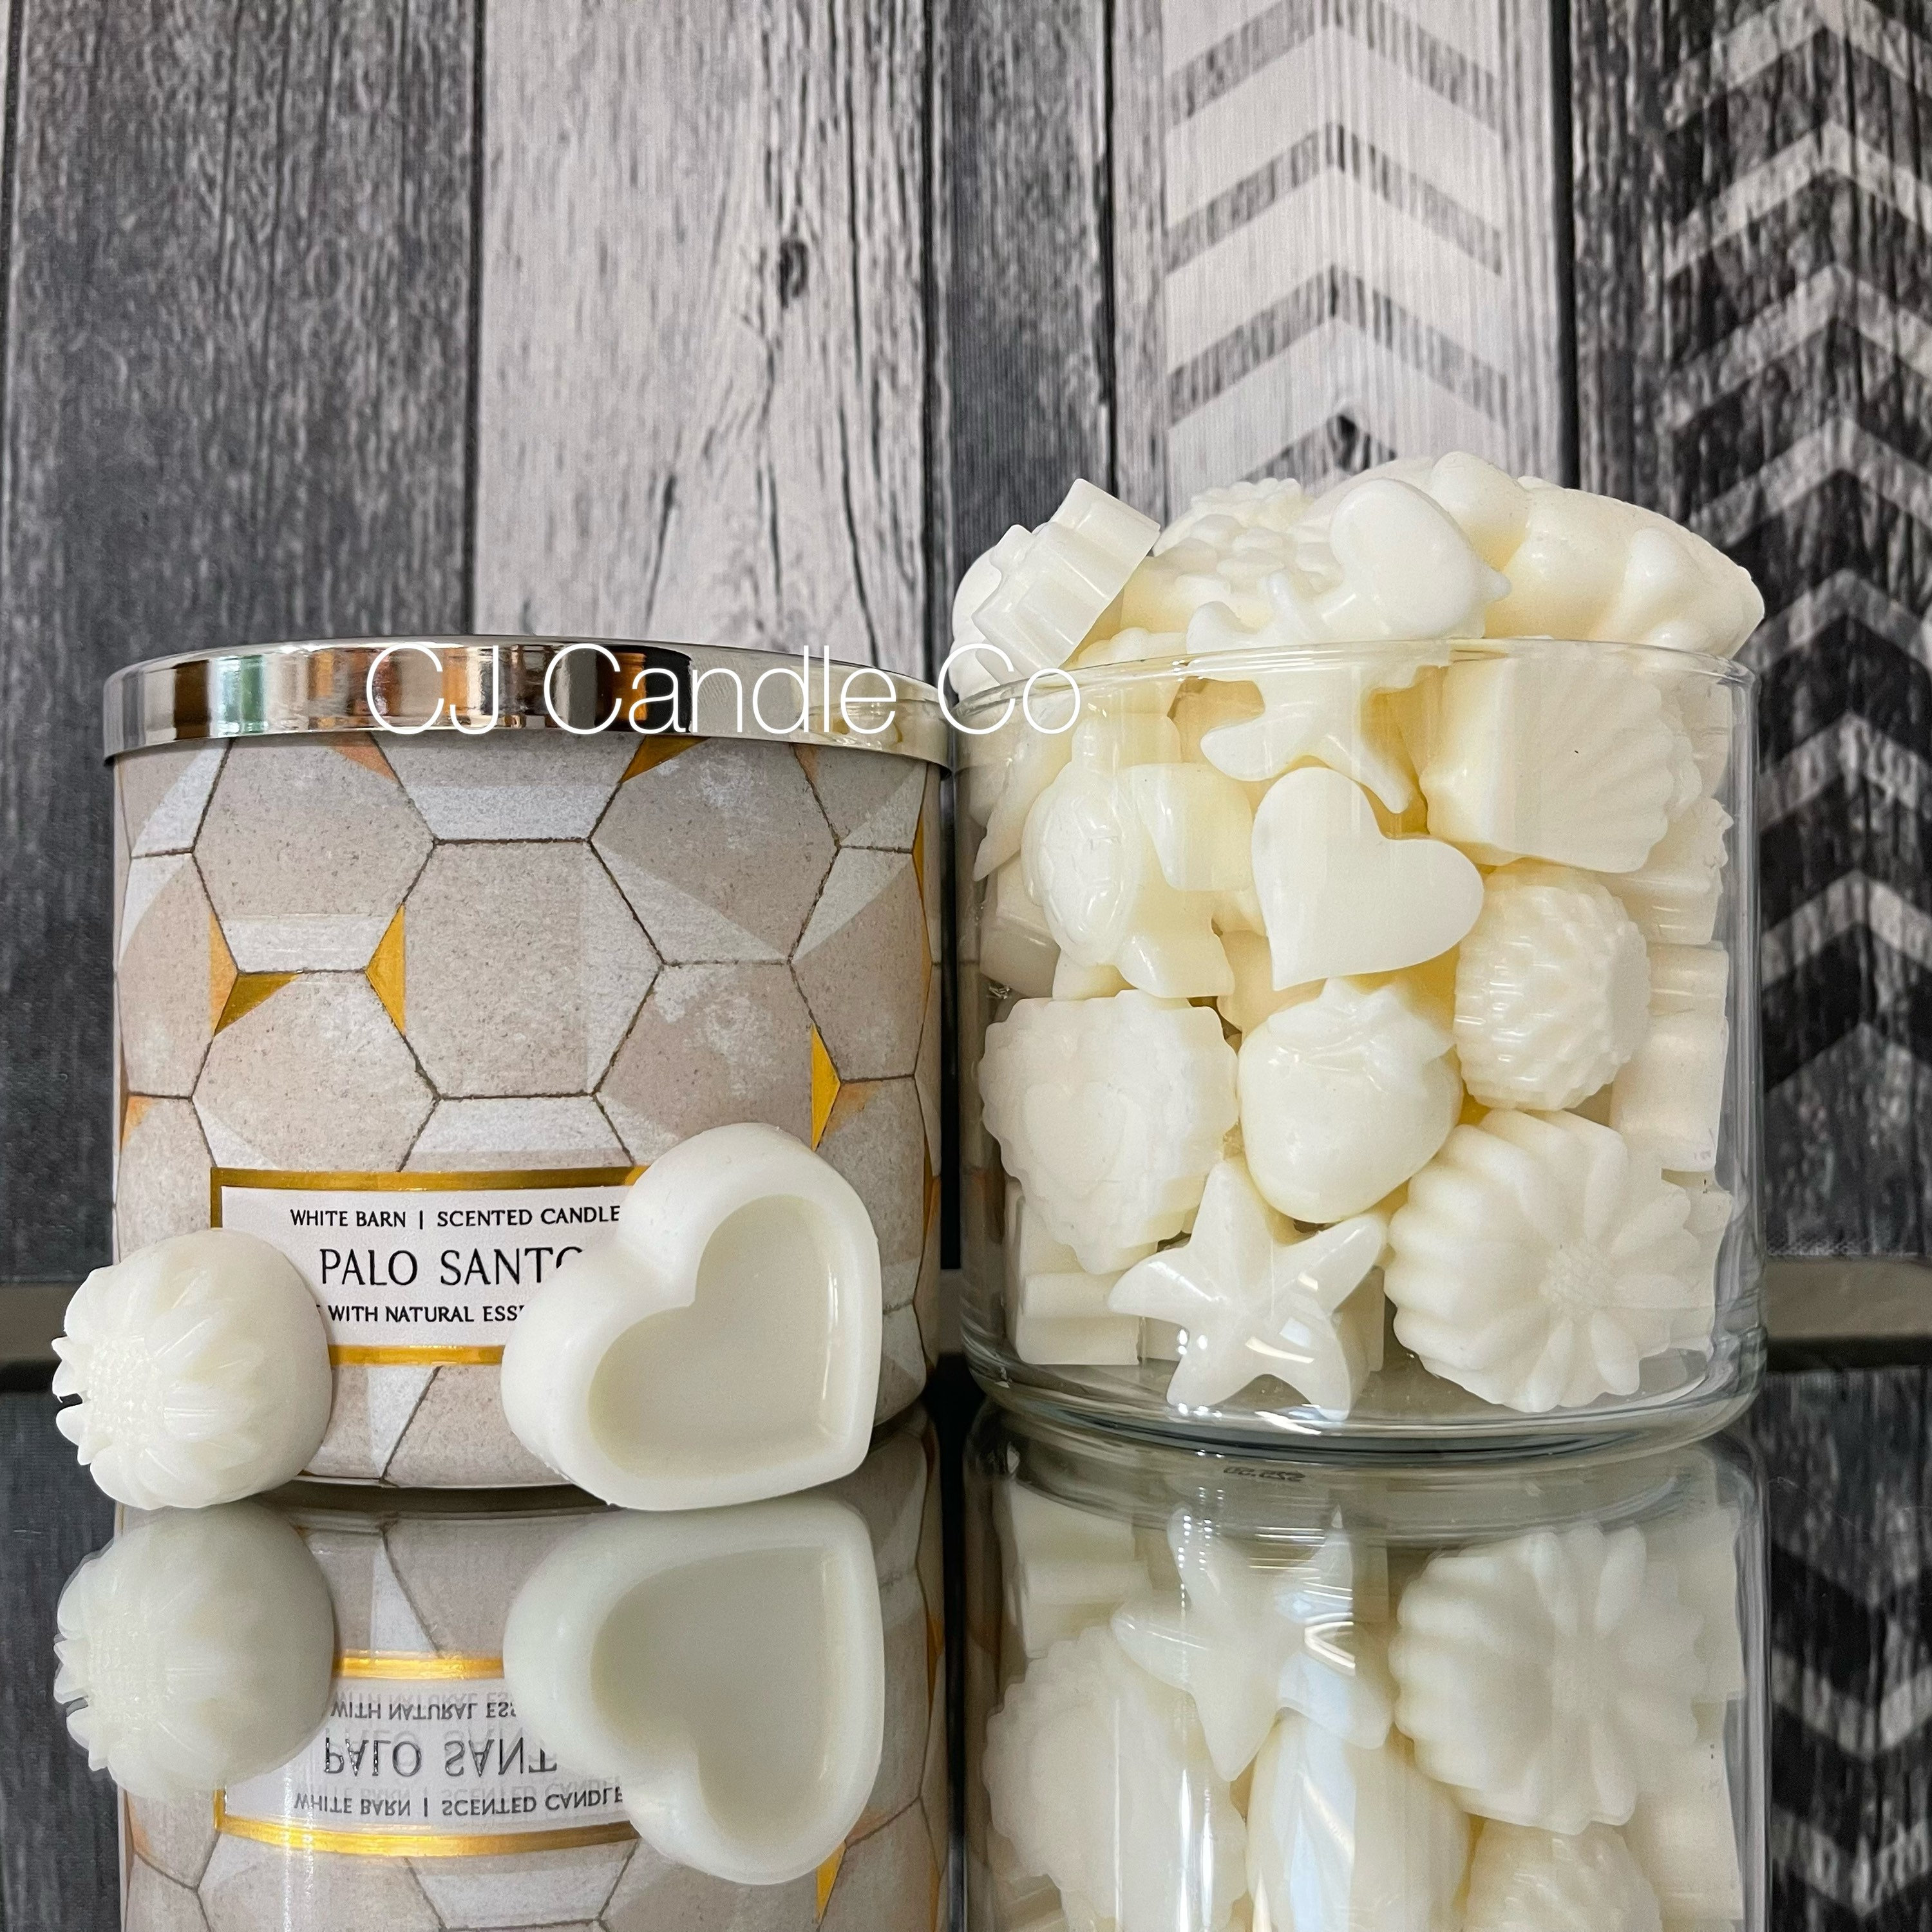 Snowy Coconut Frost Bath & Body Works Candle Wax Melts BBW Wax Melts  Perfect Gift for Mom, Sister, Best Friend, Valentines 